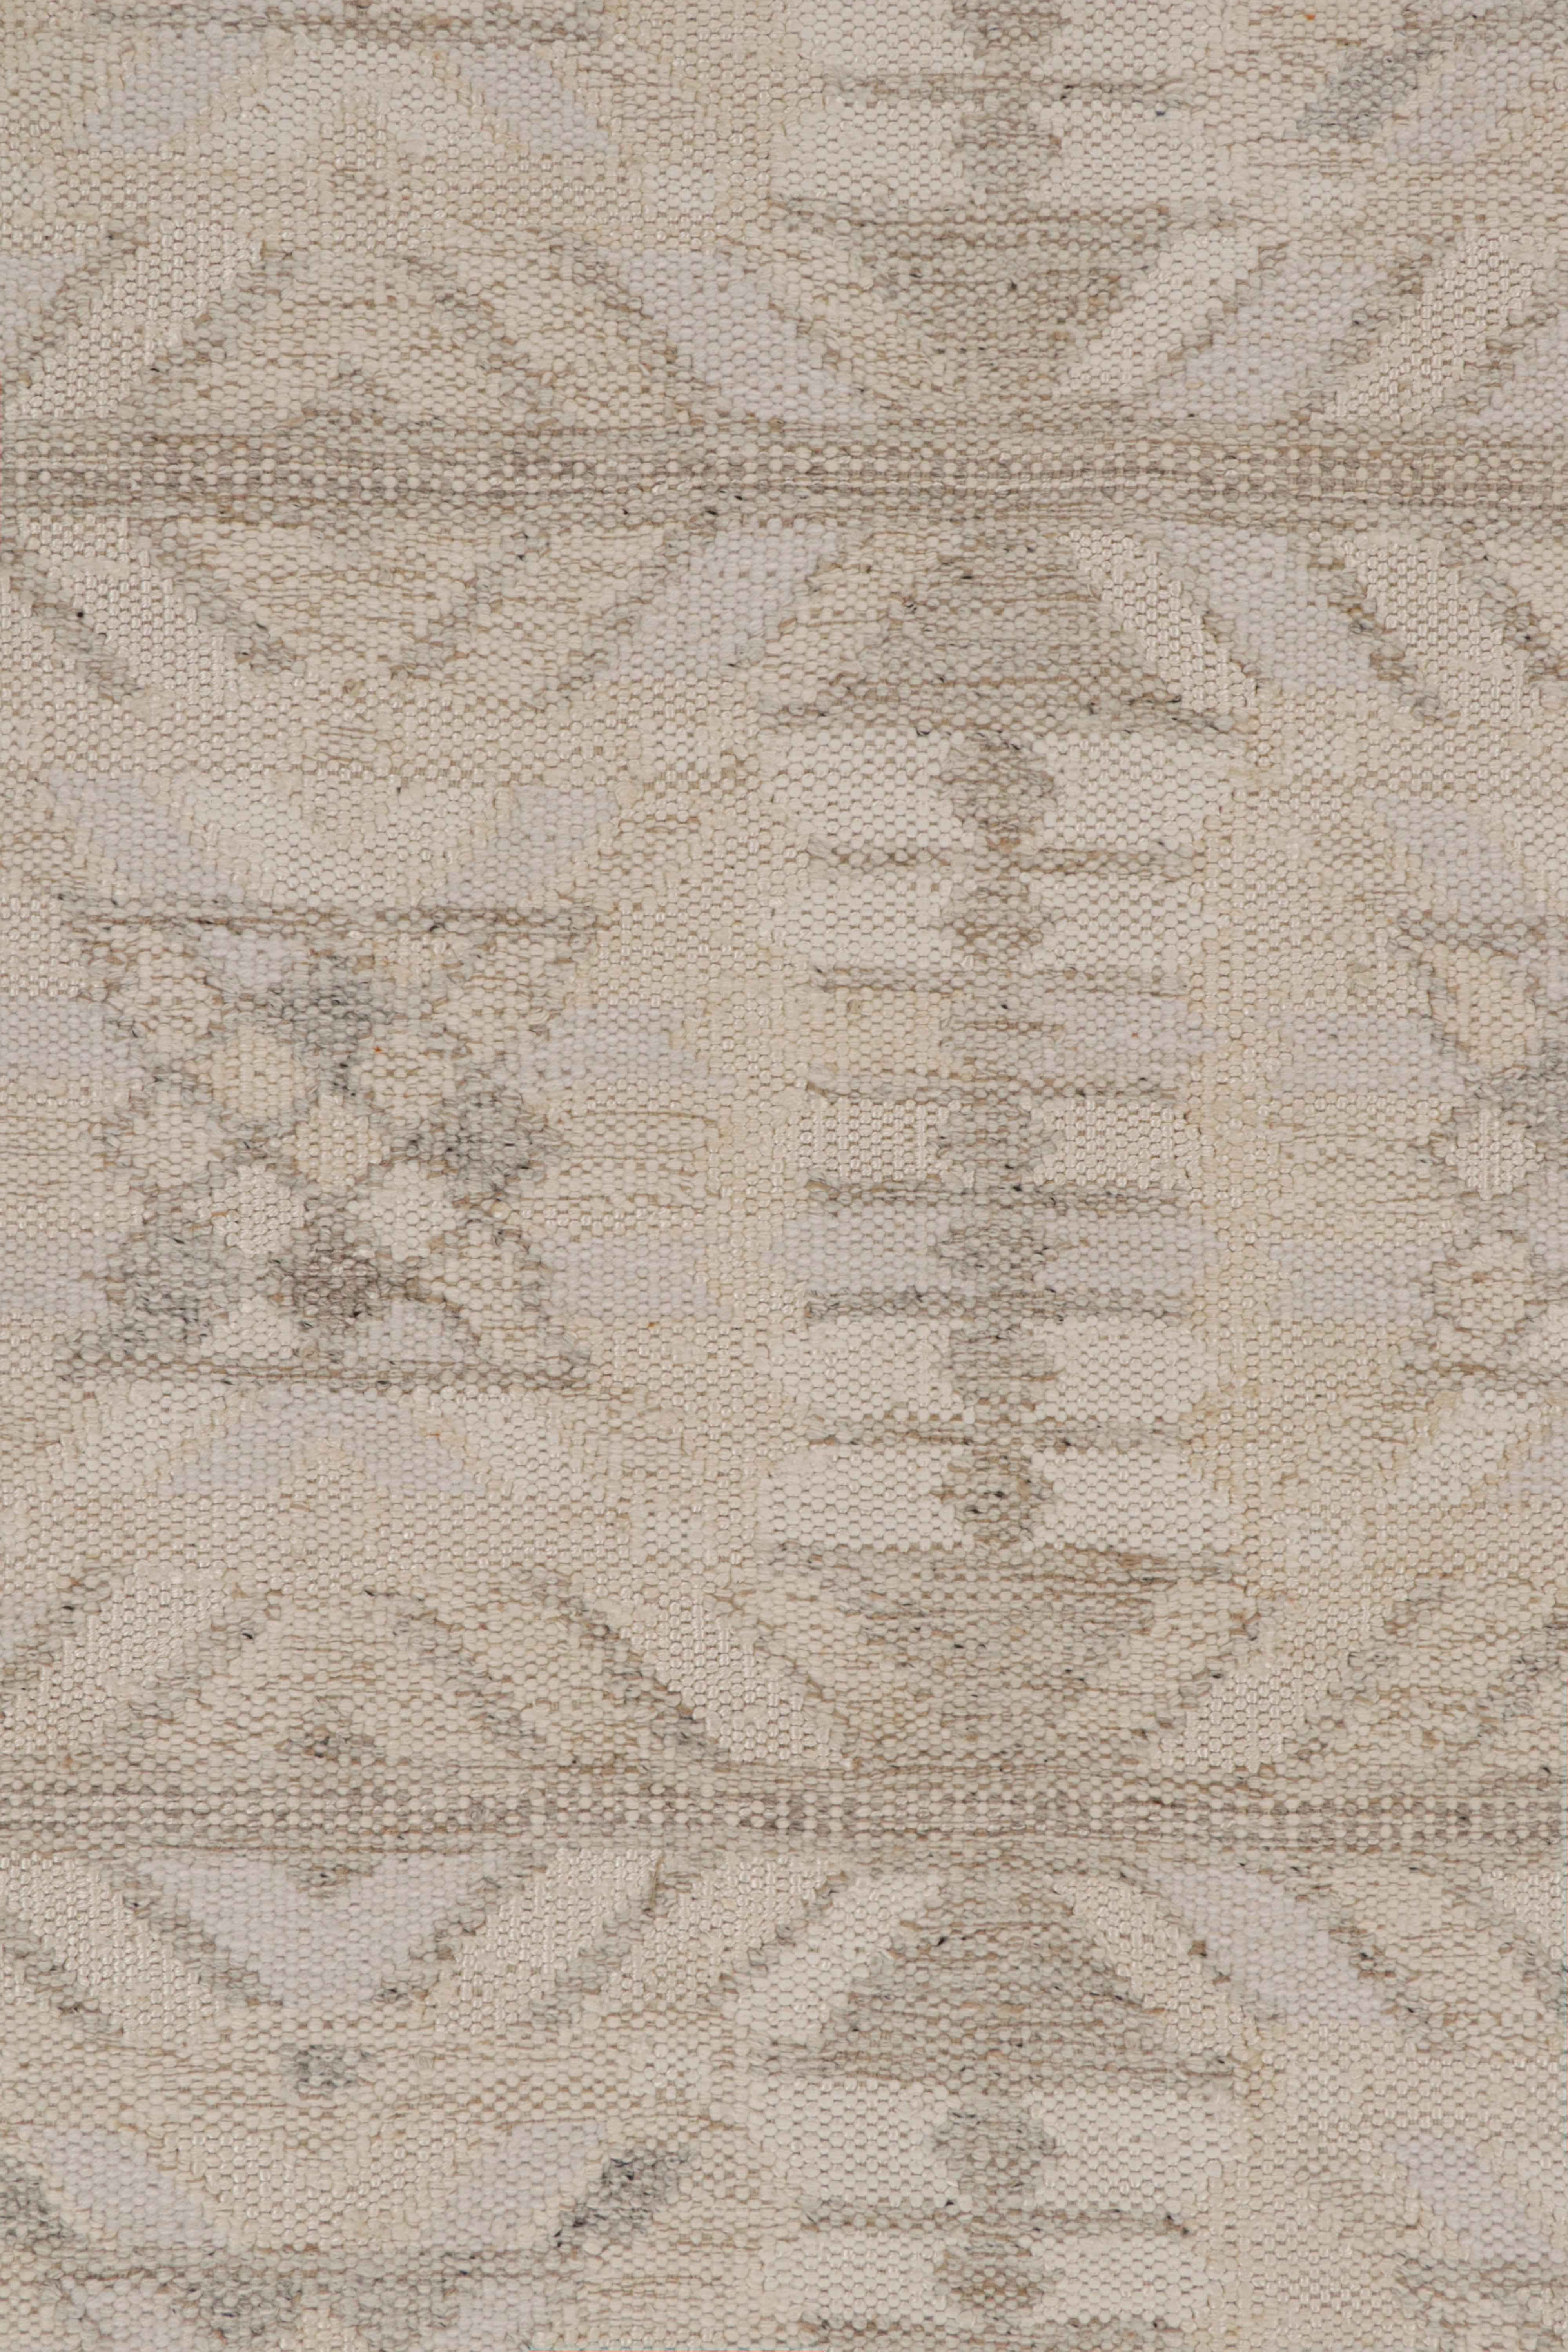 Rug & Kilim’s Scandinavian Style Kilim Rug in Grey & Beige Geometric Patterns In New Condition For Sale In Long Island City, NY